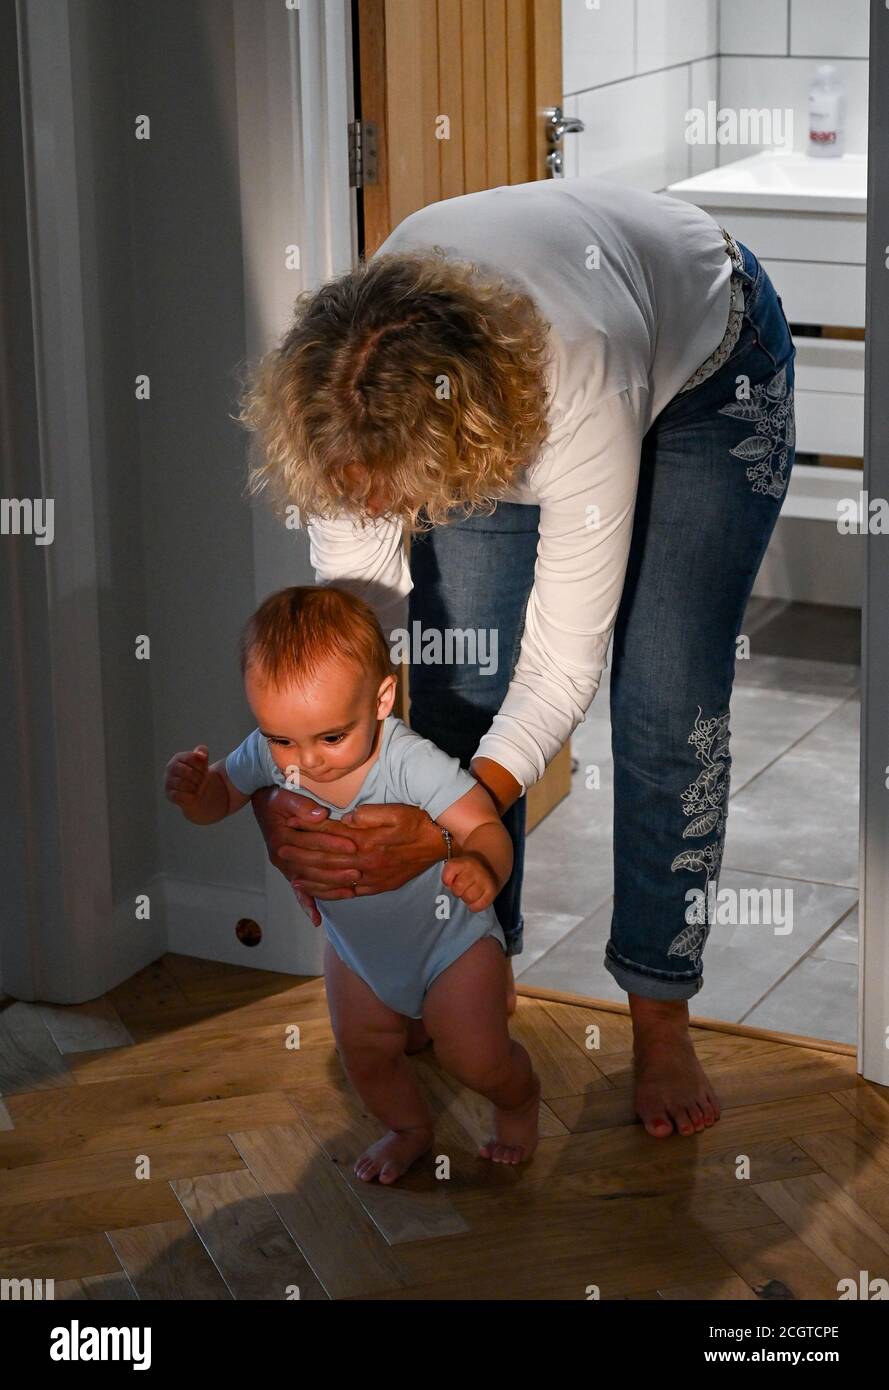 Young 10 month old baby boy learning to walk with his grandmother Stock Photo